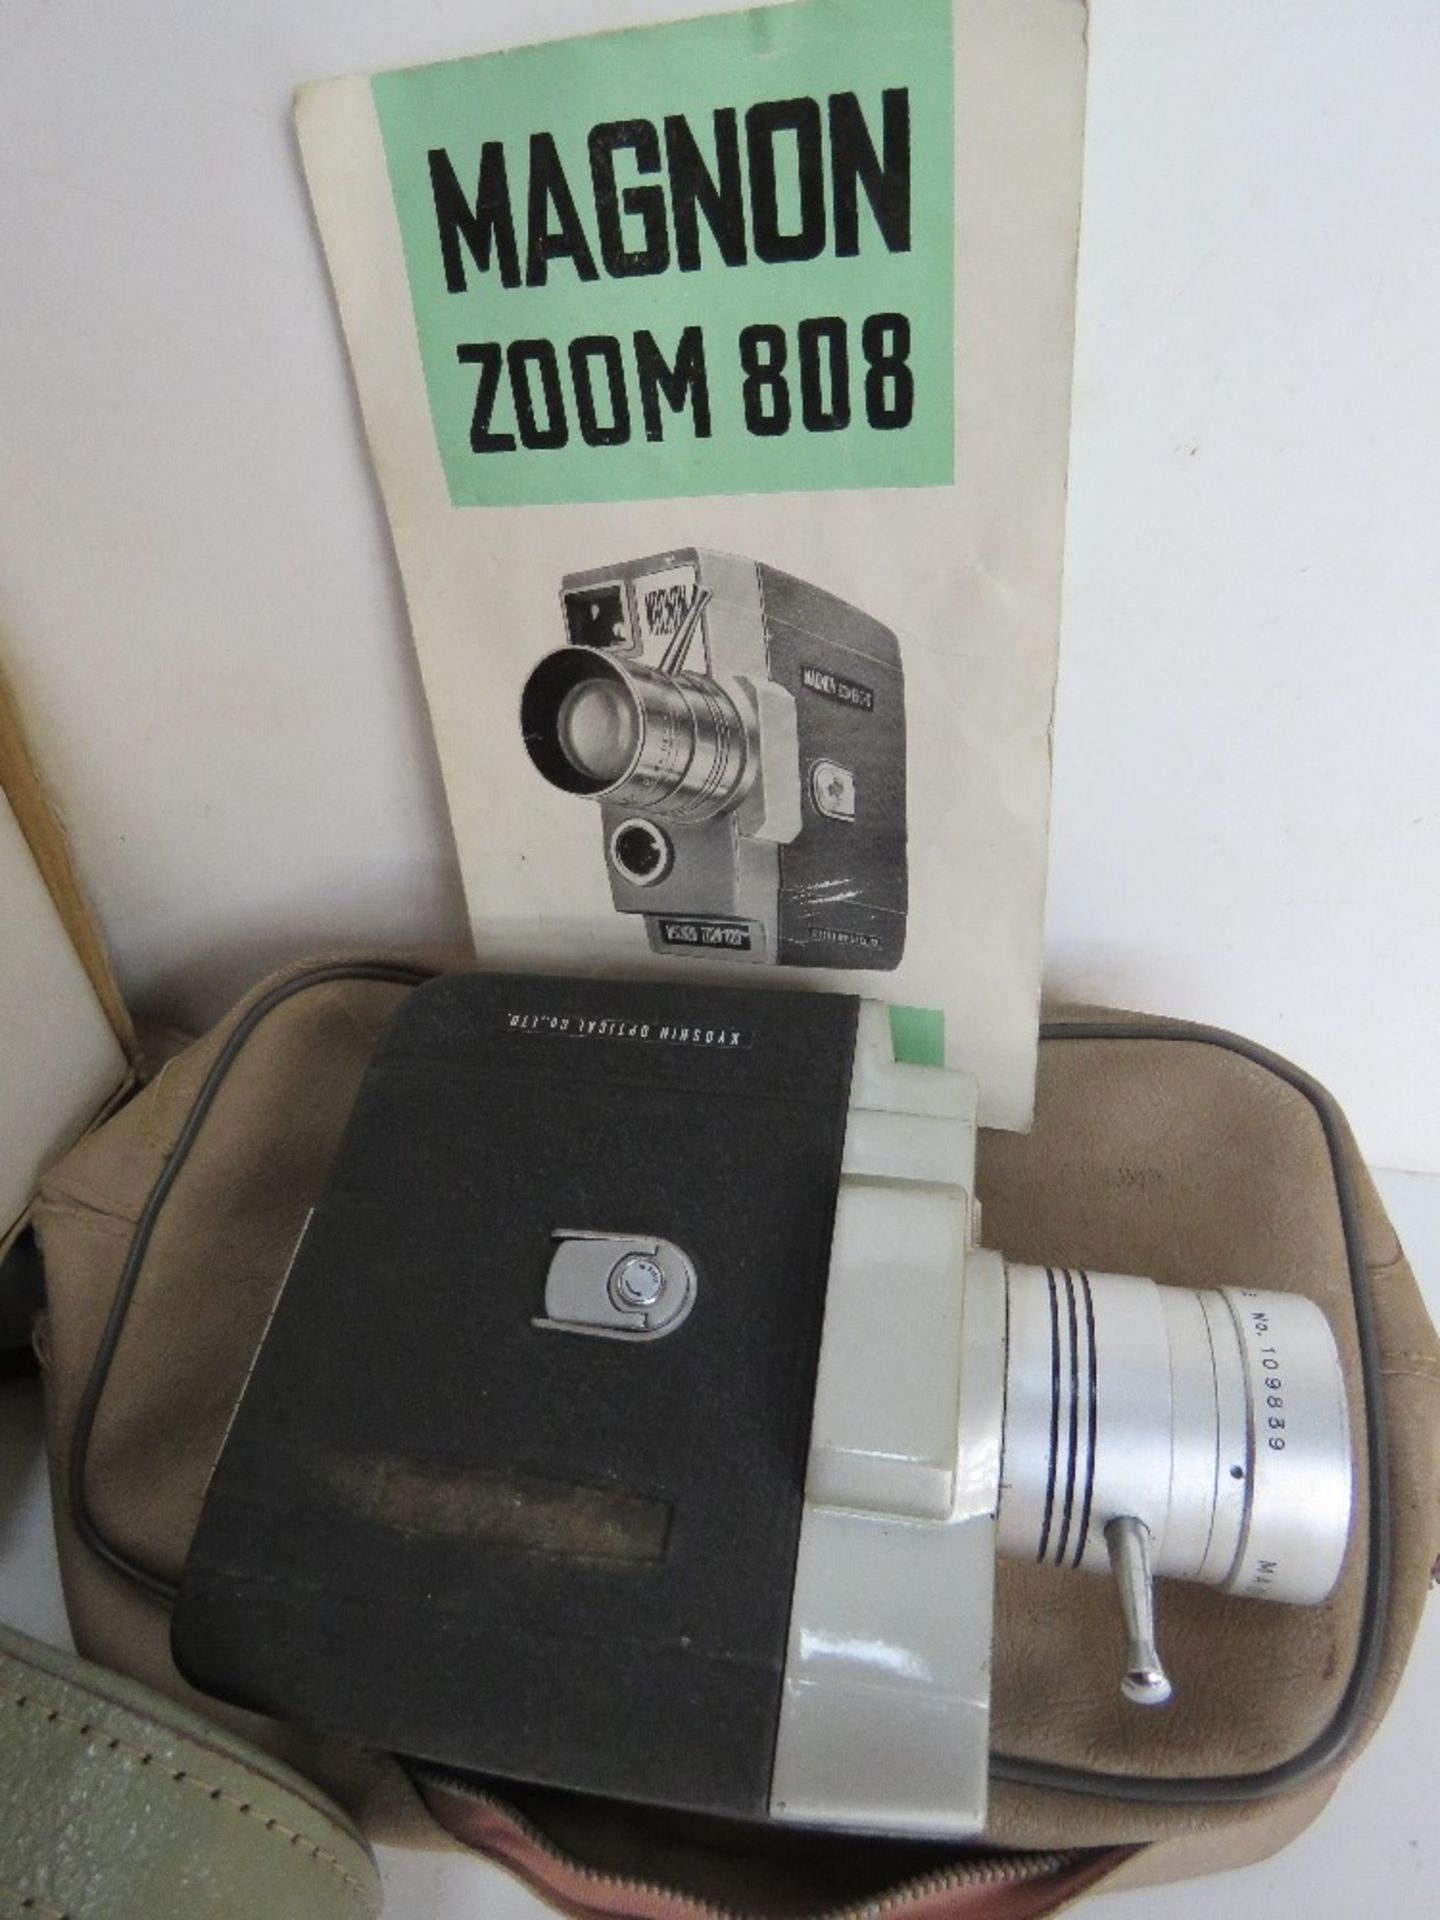 A quantity of assorted cameras inc Lumicon, Magnon Zoom 808, Bell & Howell, Samsung video camera, - Image 3 of 6